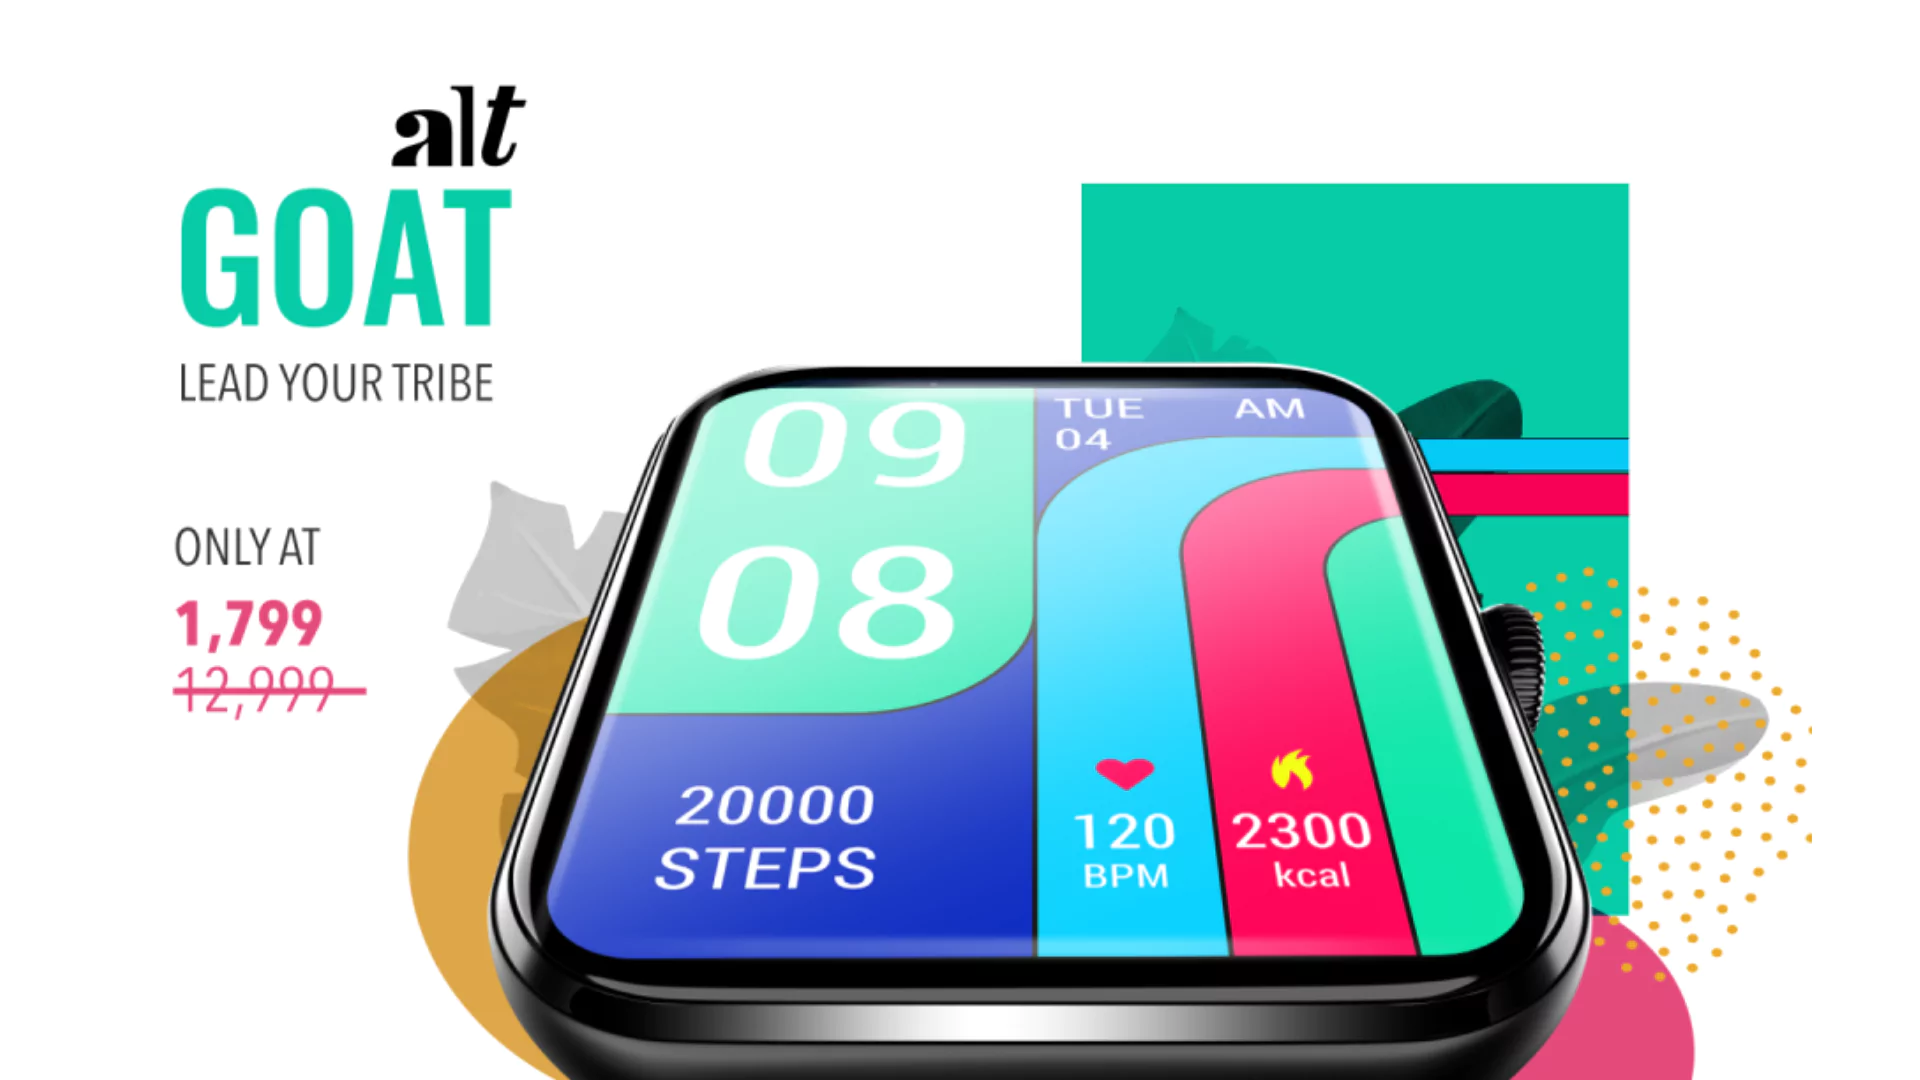 alt launch alt GOAT Smartwatch in India with affordable AMOLED display